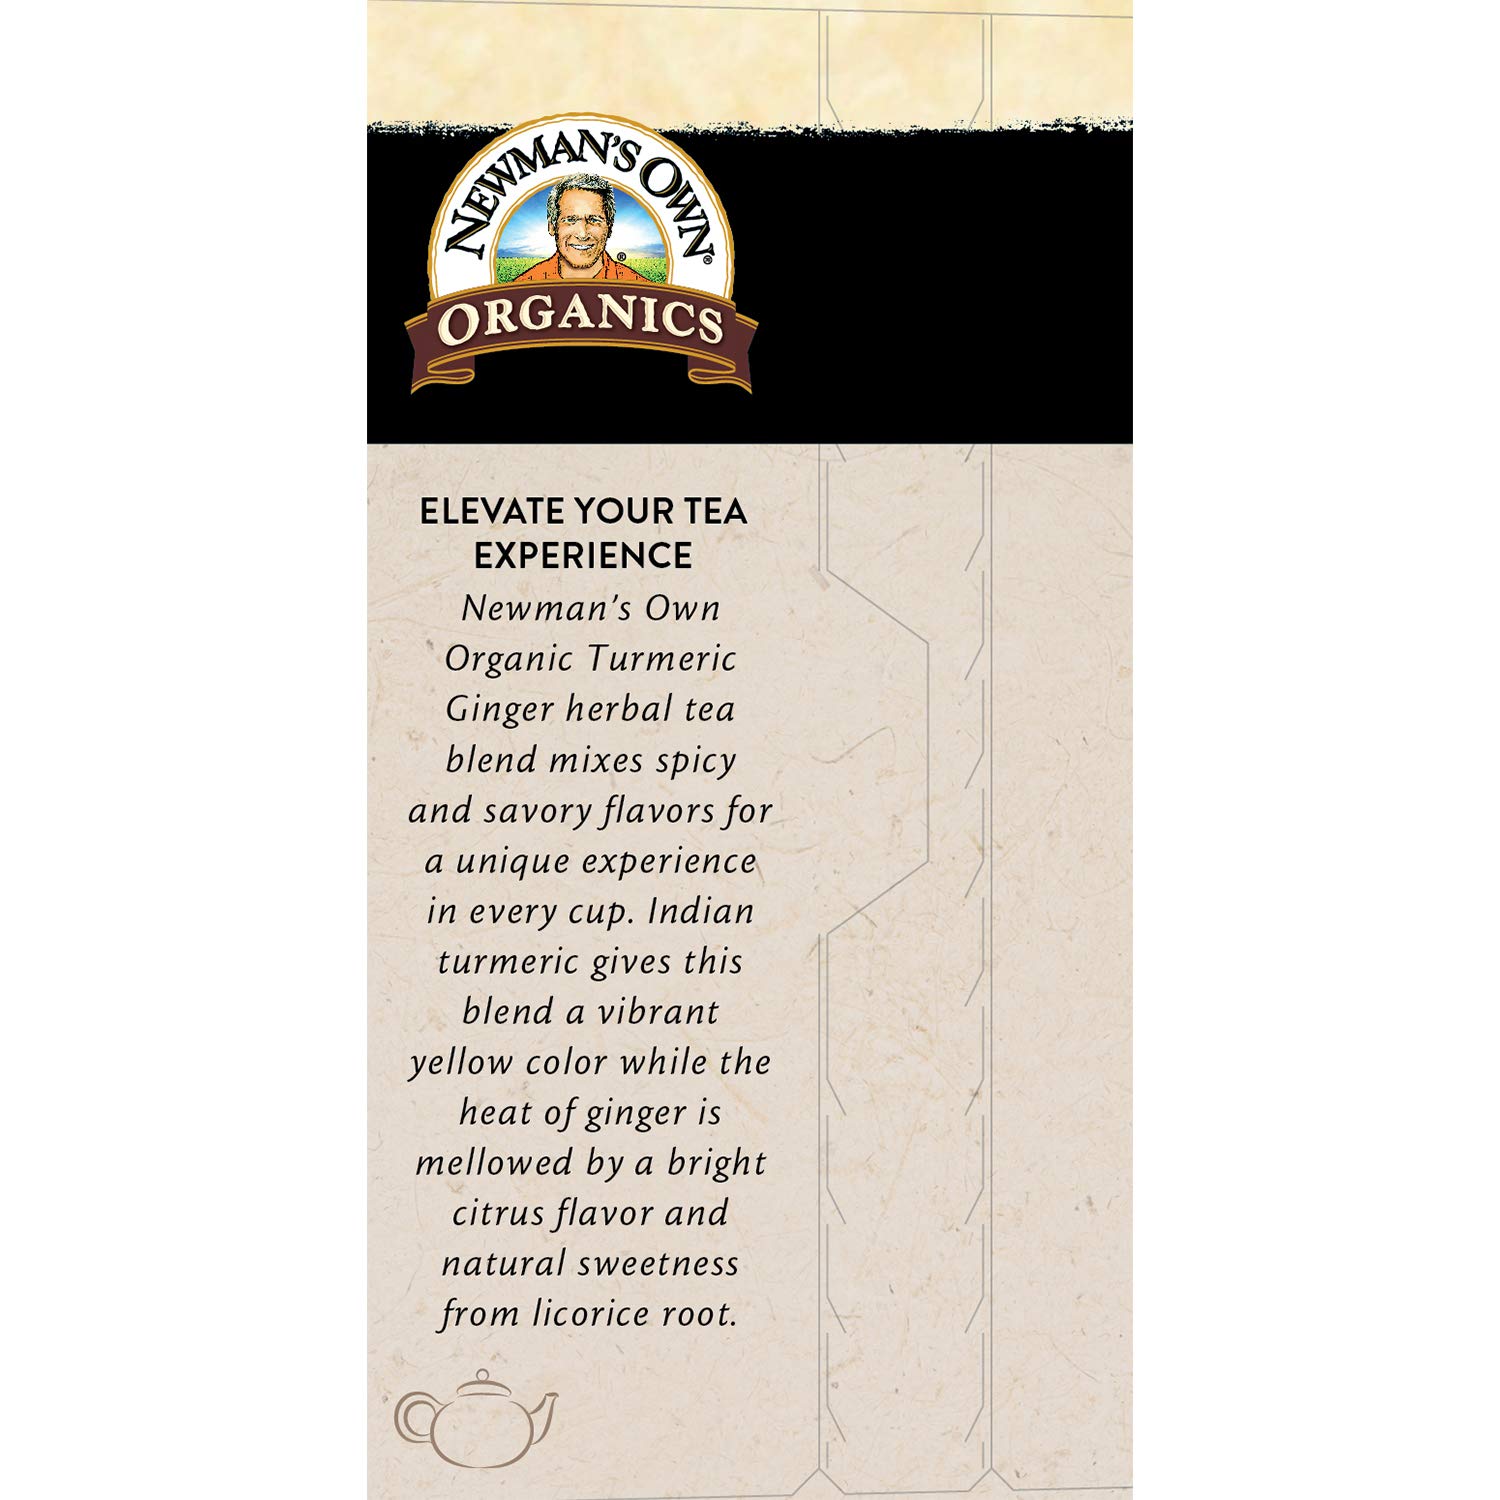 Newman’s Own Organic Turmeric Ginger Herbal Tea Caffeine-Free May Aid Digestion and Boost Immunity Turmeric Tea with20 Individually Wrapped Tea Bags Per Box (Pack of 4) USDA Certified